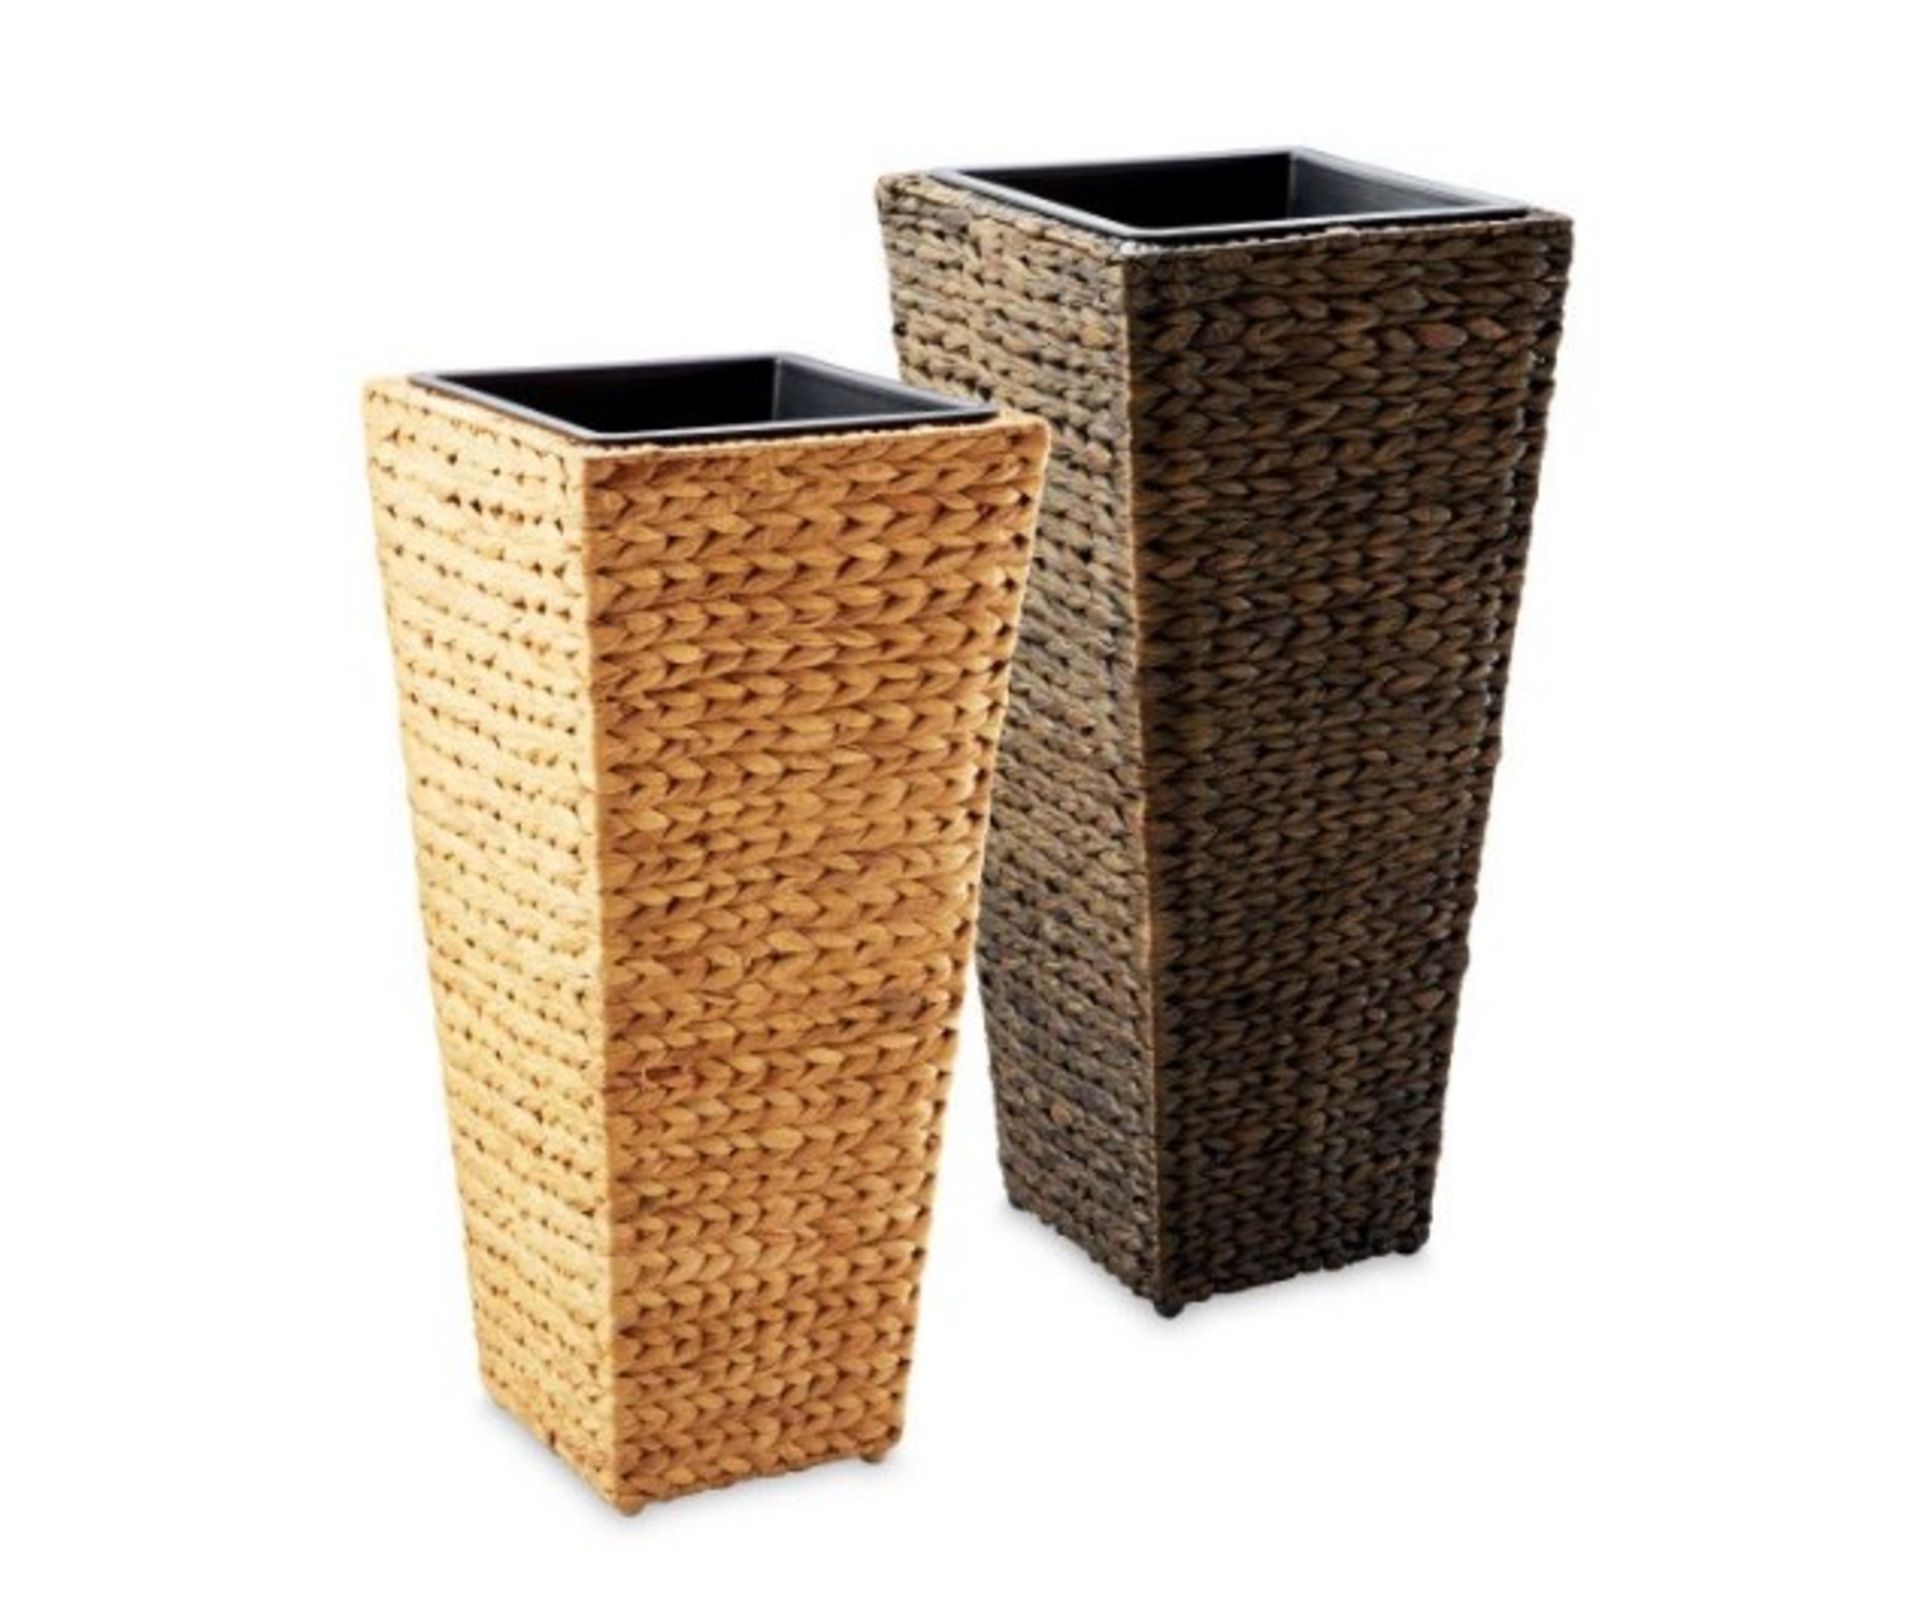 V Brand New 60cm Rattan Weave Ceramic Planter - With Removable Planting Bin - Feet for Floor - Image 3 of 3